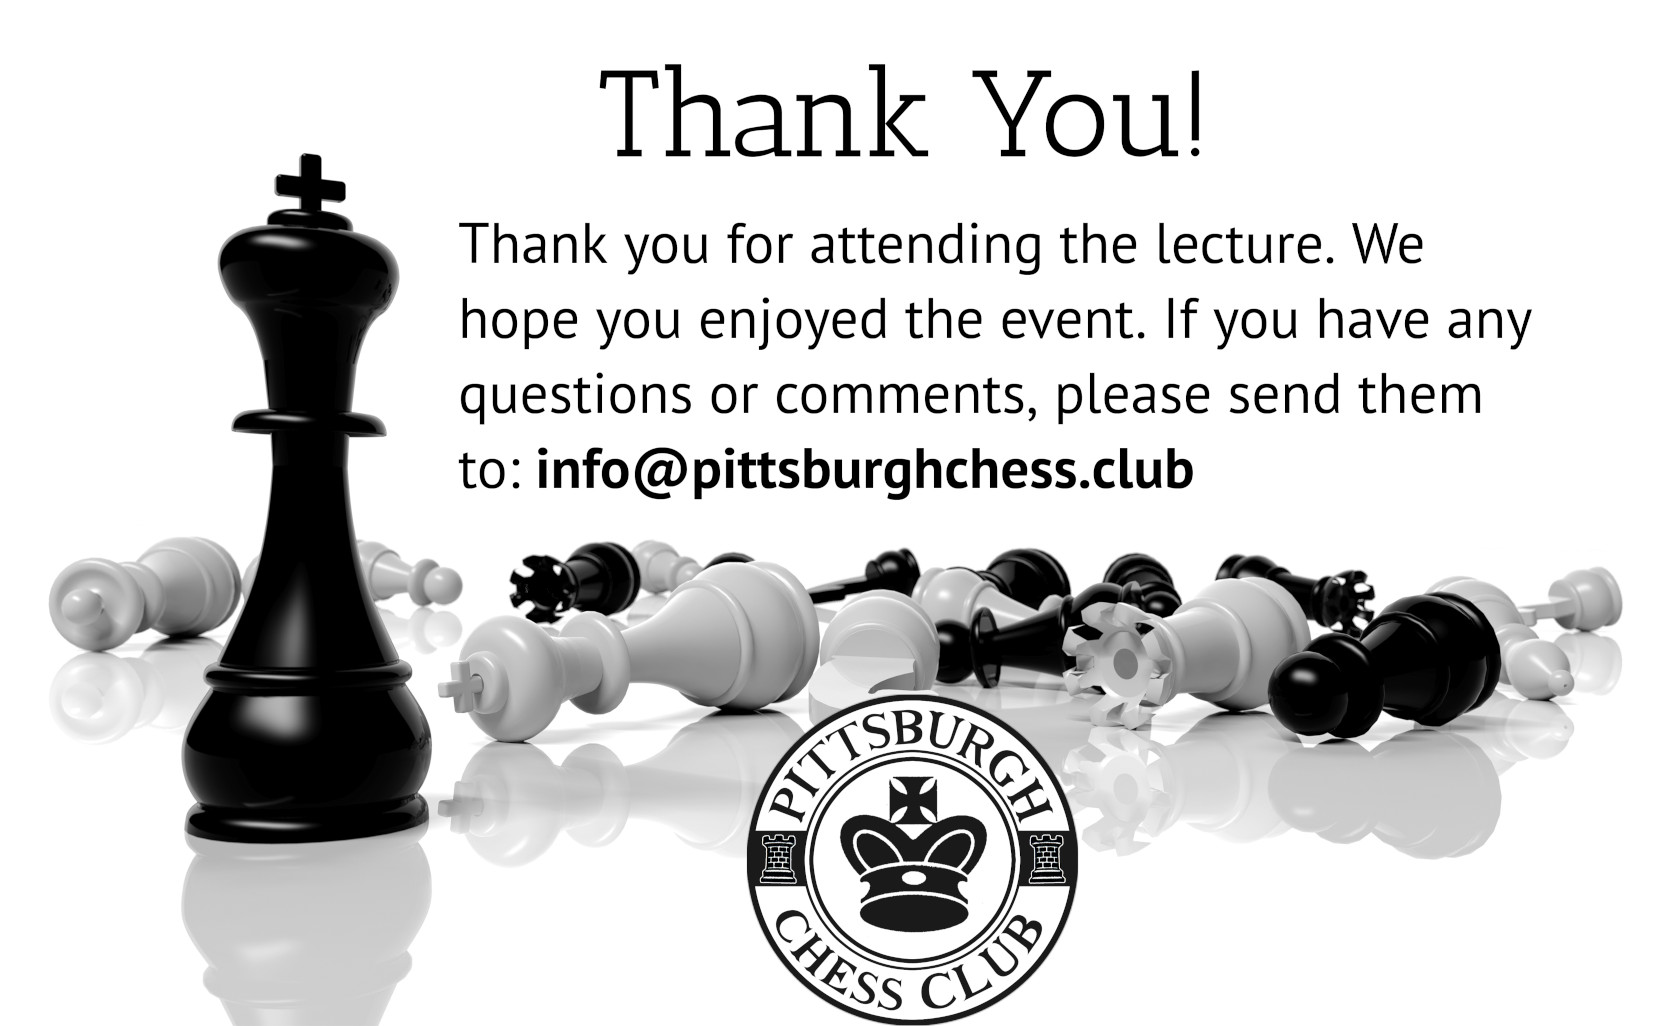 Thank you for attending the lecture.